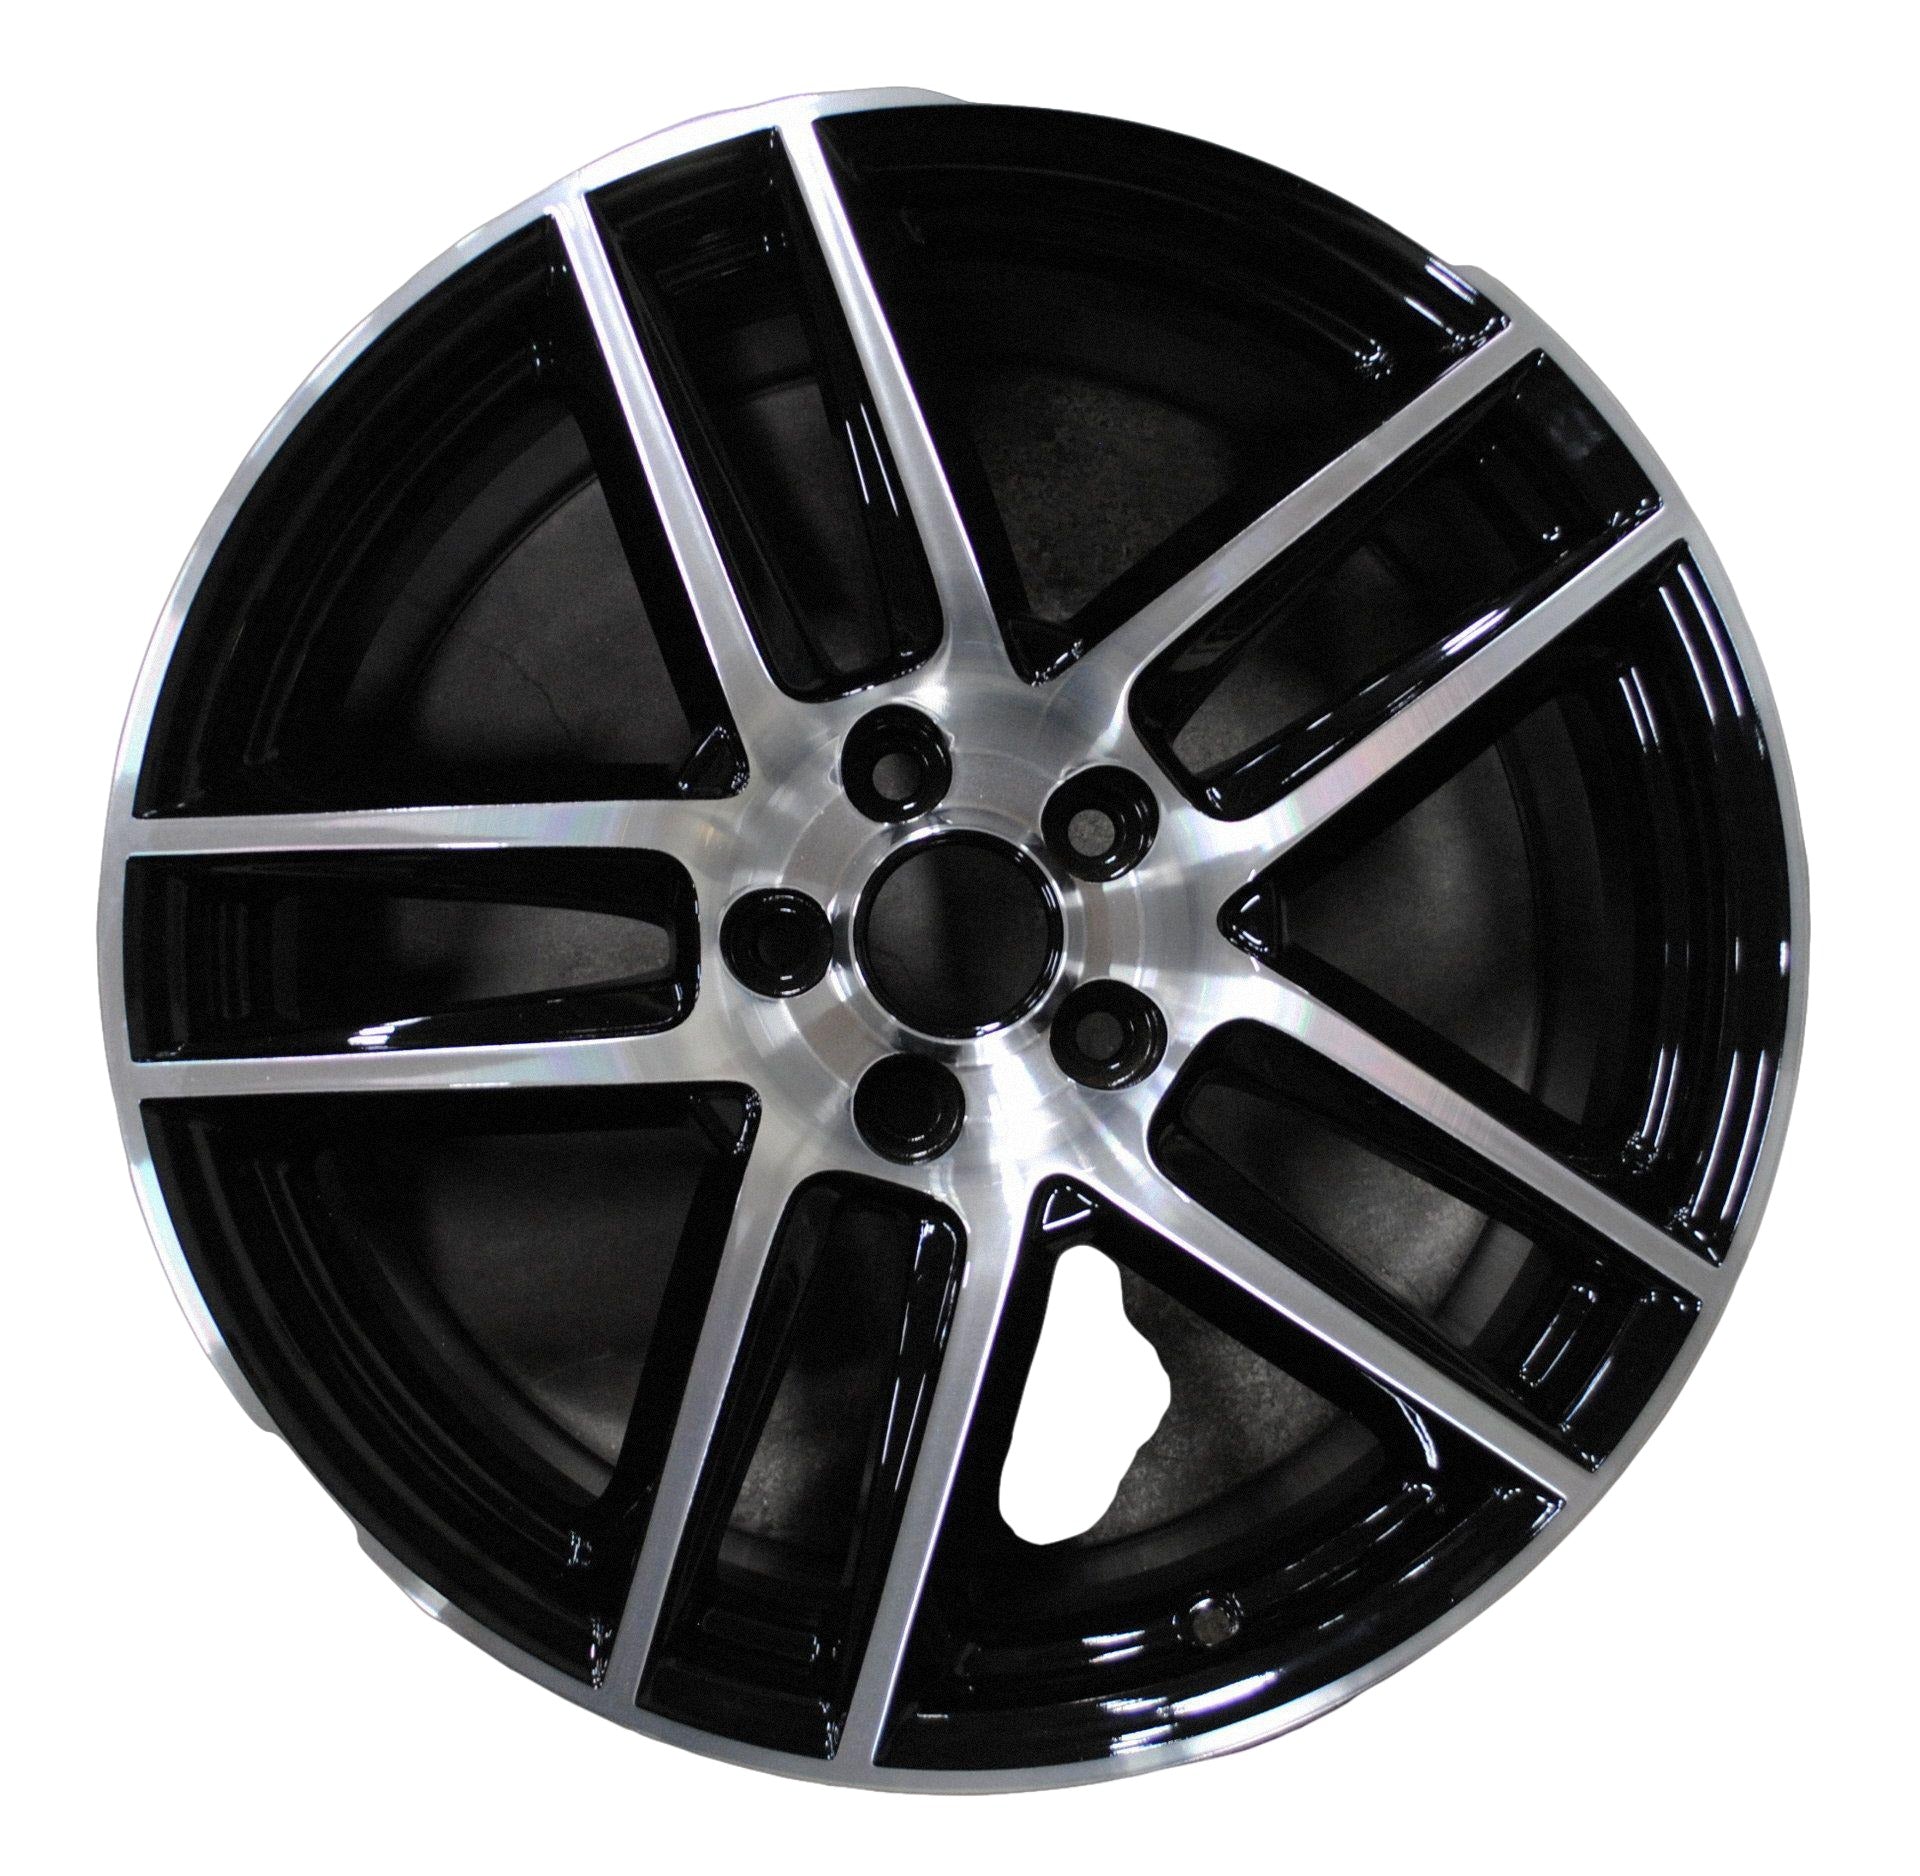 Ford Mustang  2012, 2013 Factory OEM Car Wheel Size 19x9 Alloy WAO.3887FT.PB01.MA